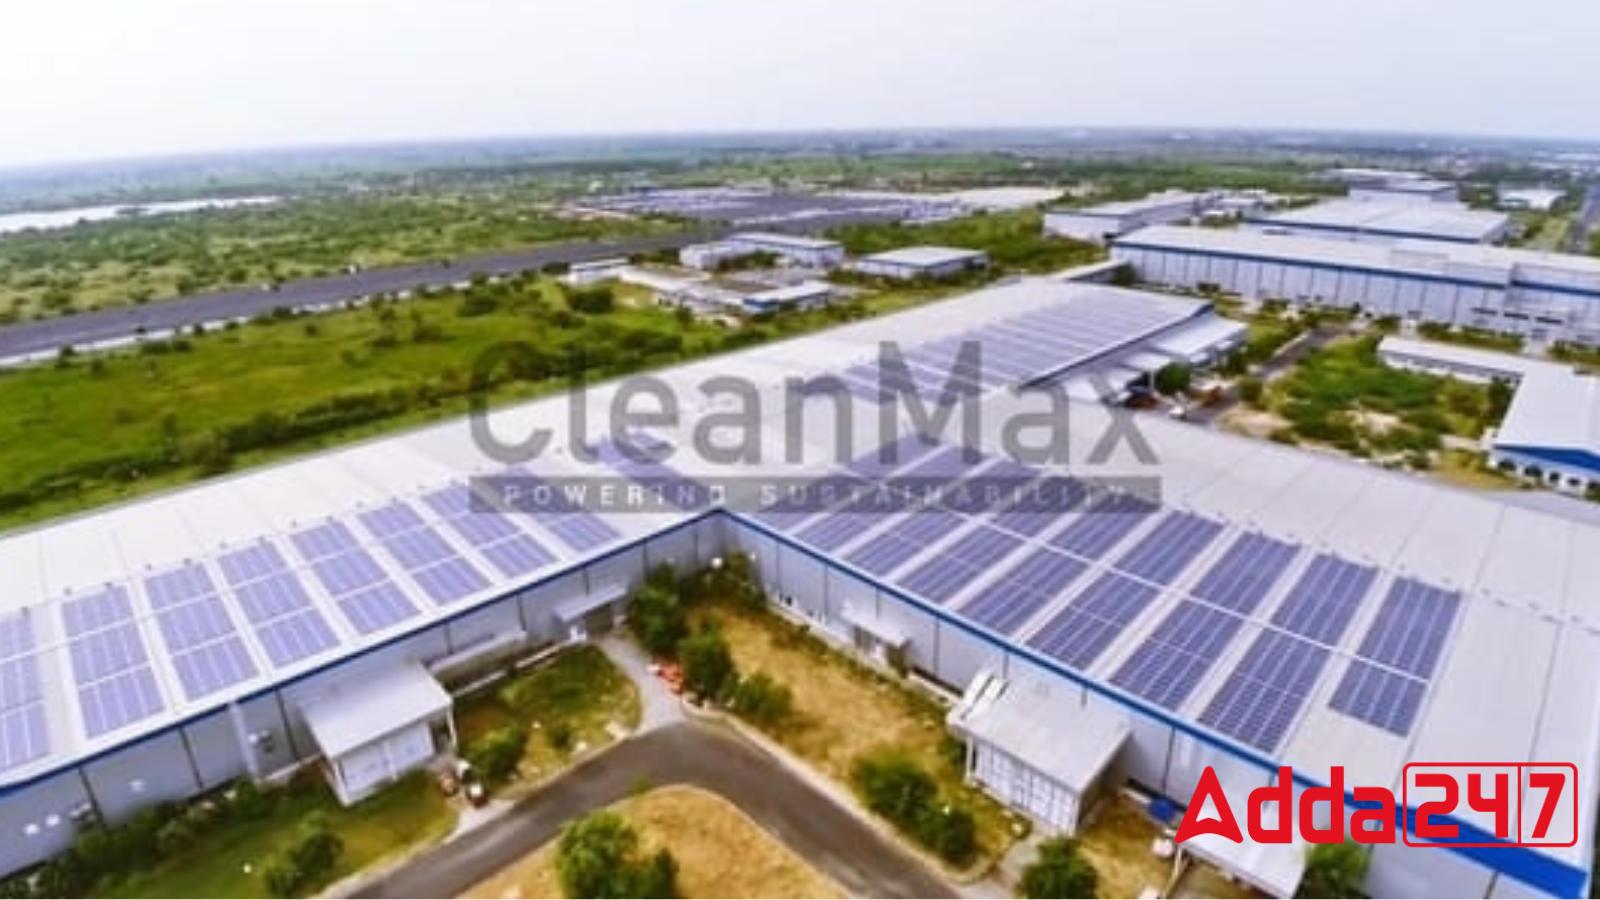 CleanMax And Bangalore International Airport Ltd Forge Long-Term Partnership For Renewable Power